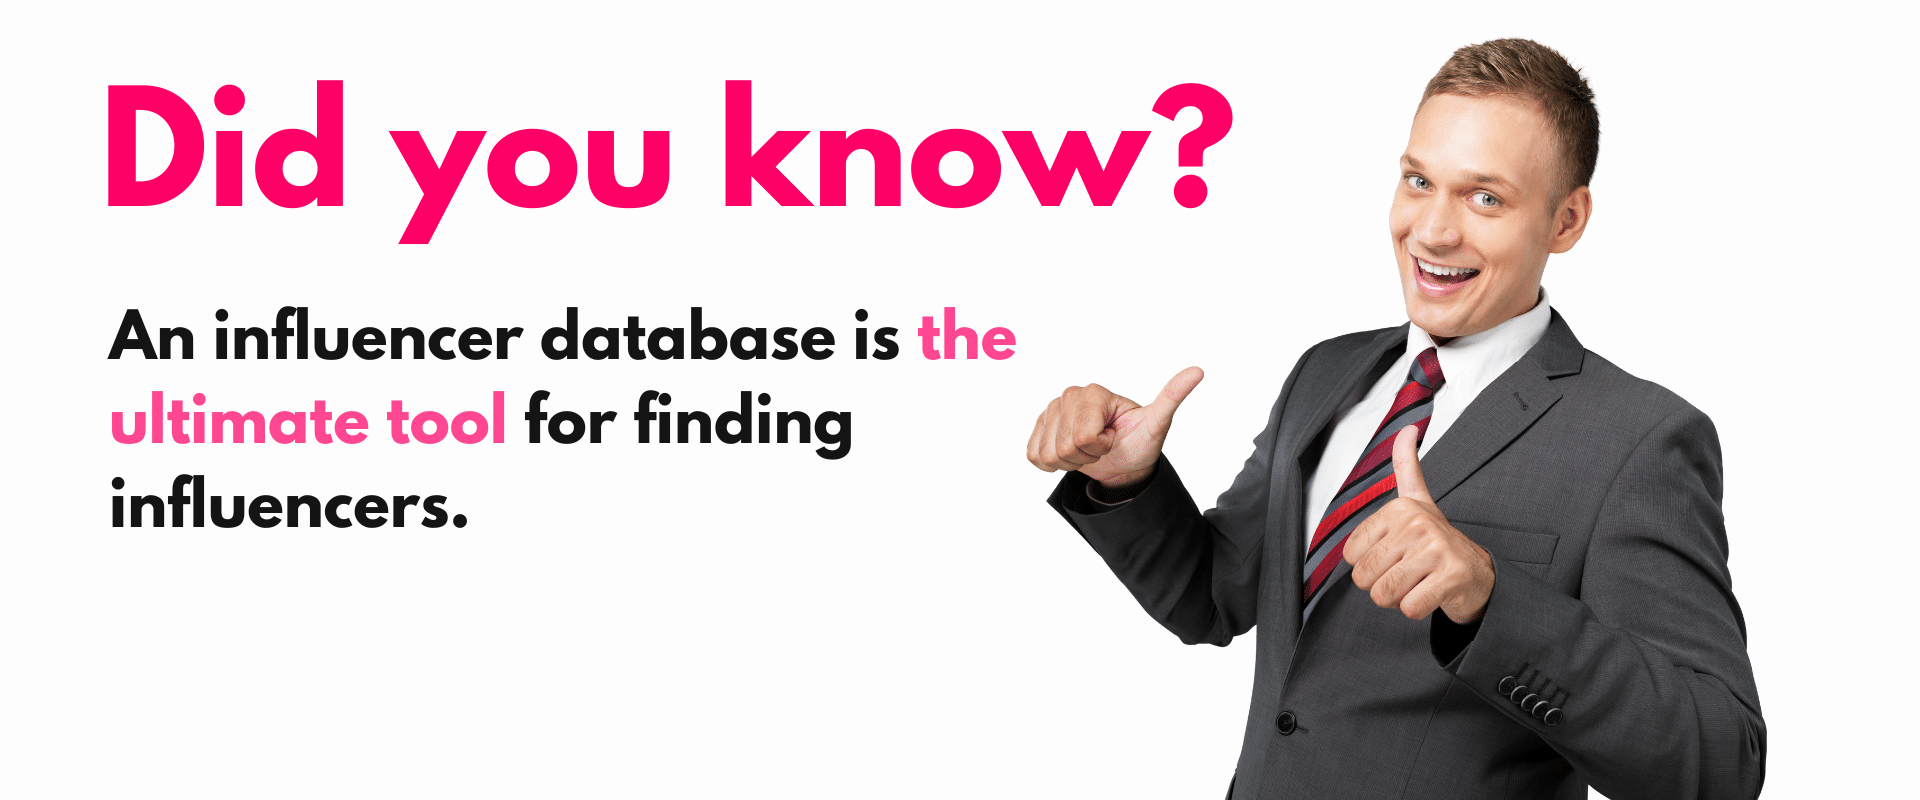 Did you know an influencer database is the ultimate tool for finding influencers?.